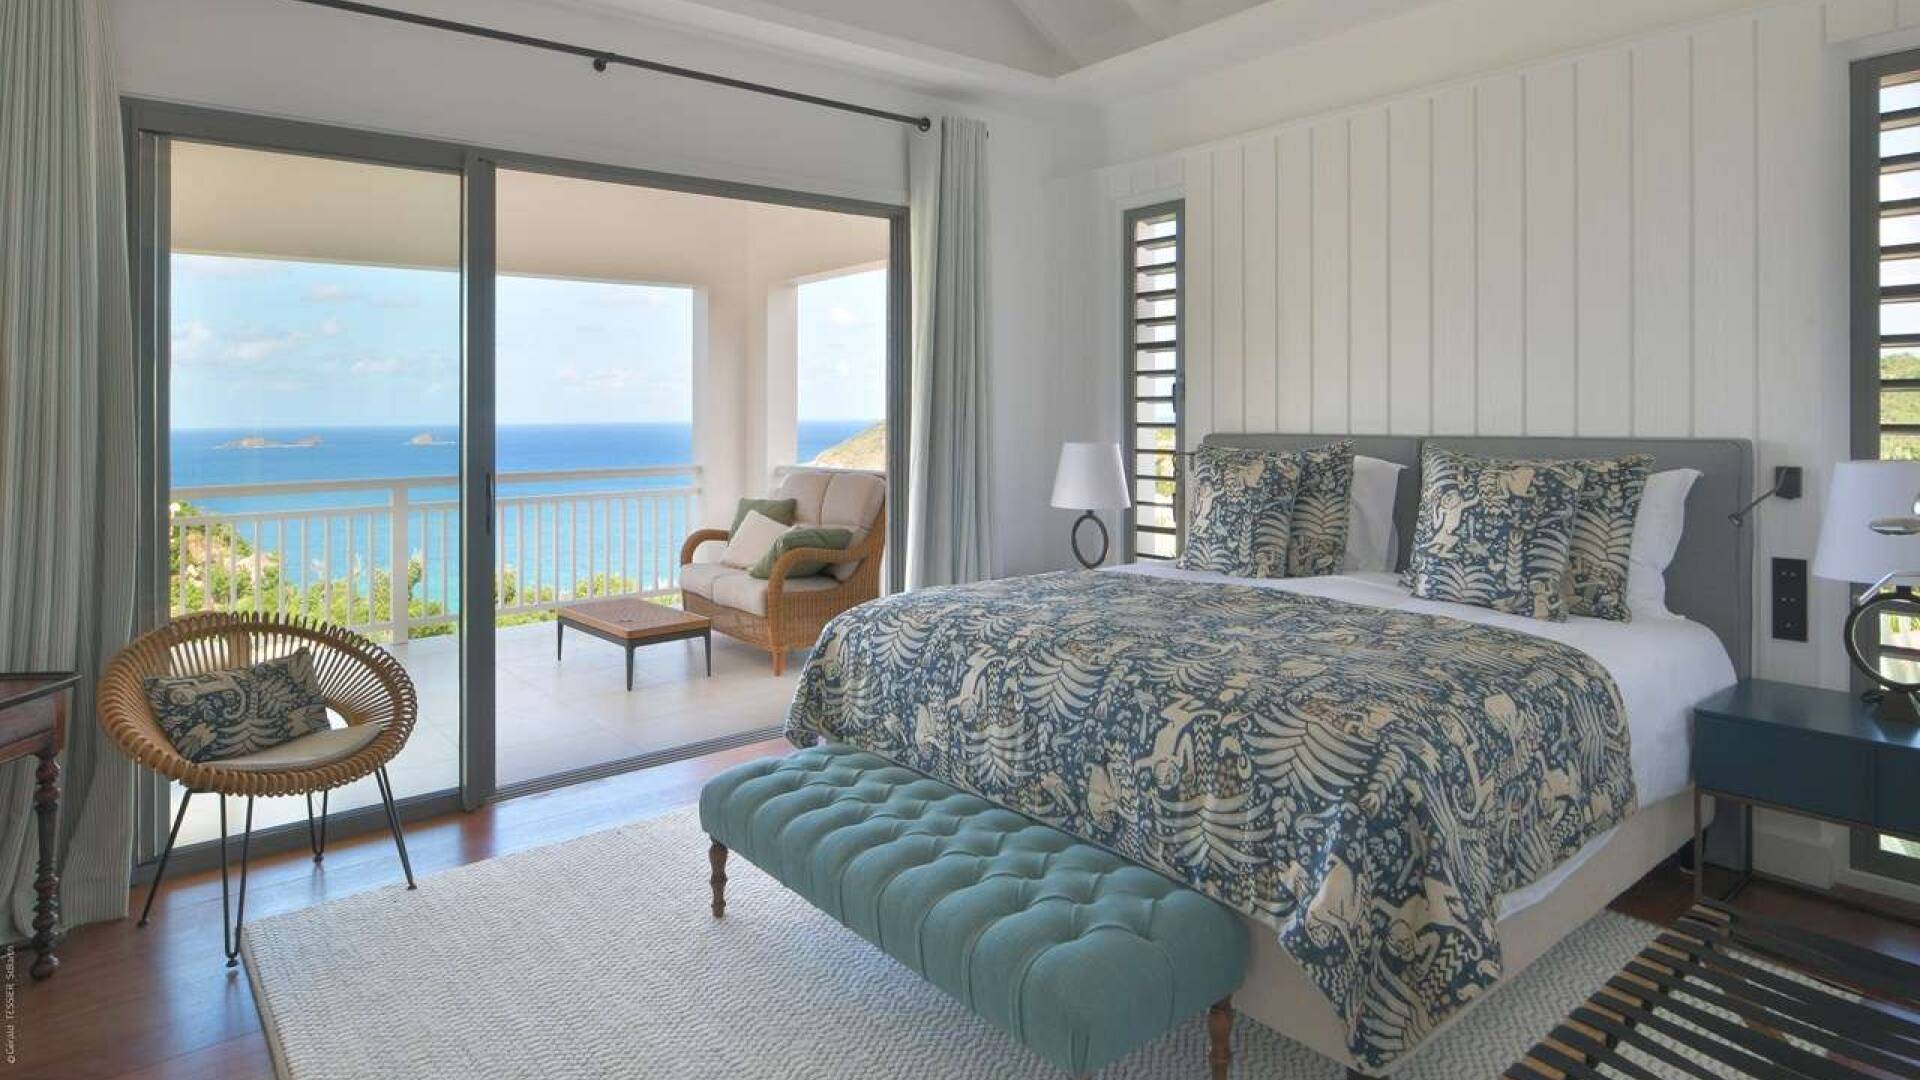 Bedroom at WV RMN, Flamands, St. Barthelemy